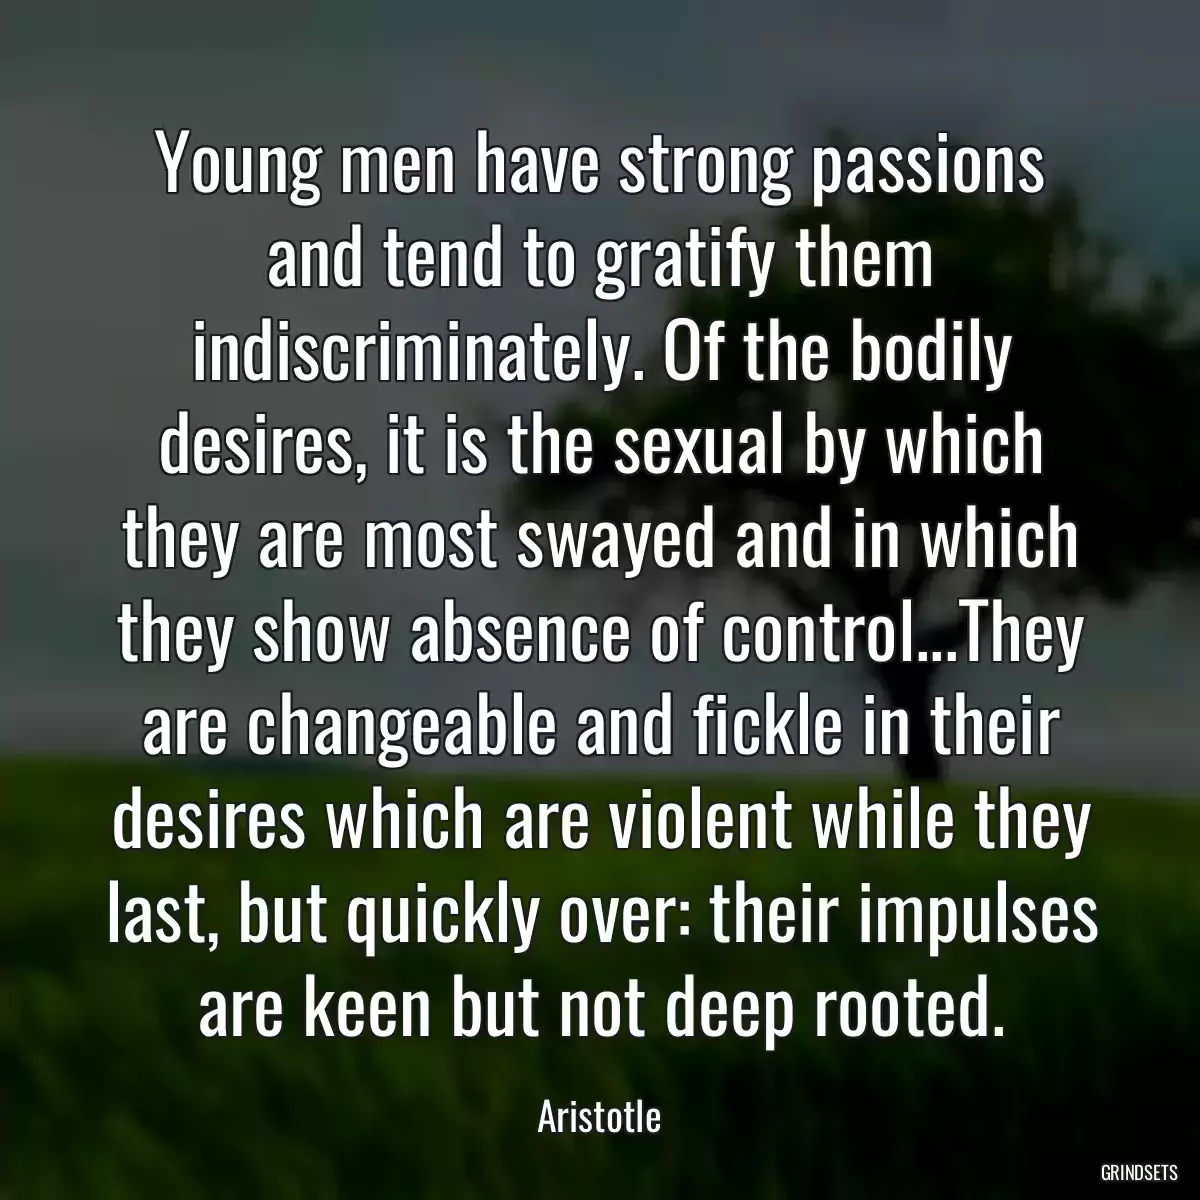 Young men have strong passions and tend to gratify them indiscriminately. Of the bodily desires, it is the sexual by which they are most swayed and in which they show absence of control...They are changeable and fickle in their desires which are violent while they last, but quickly over: their impulses are keen but not deep rooted.